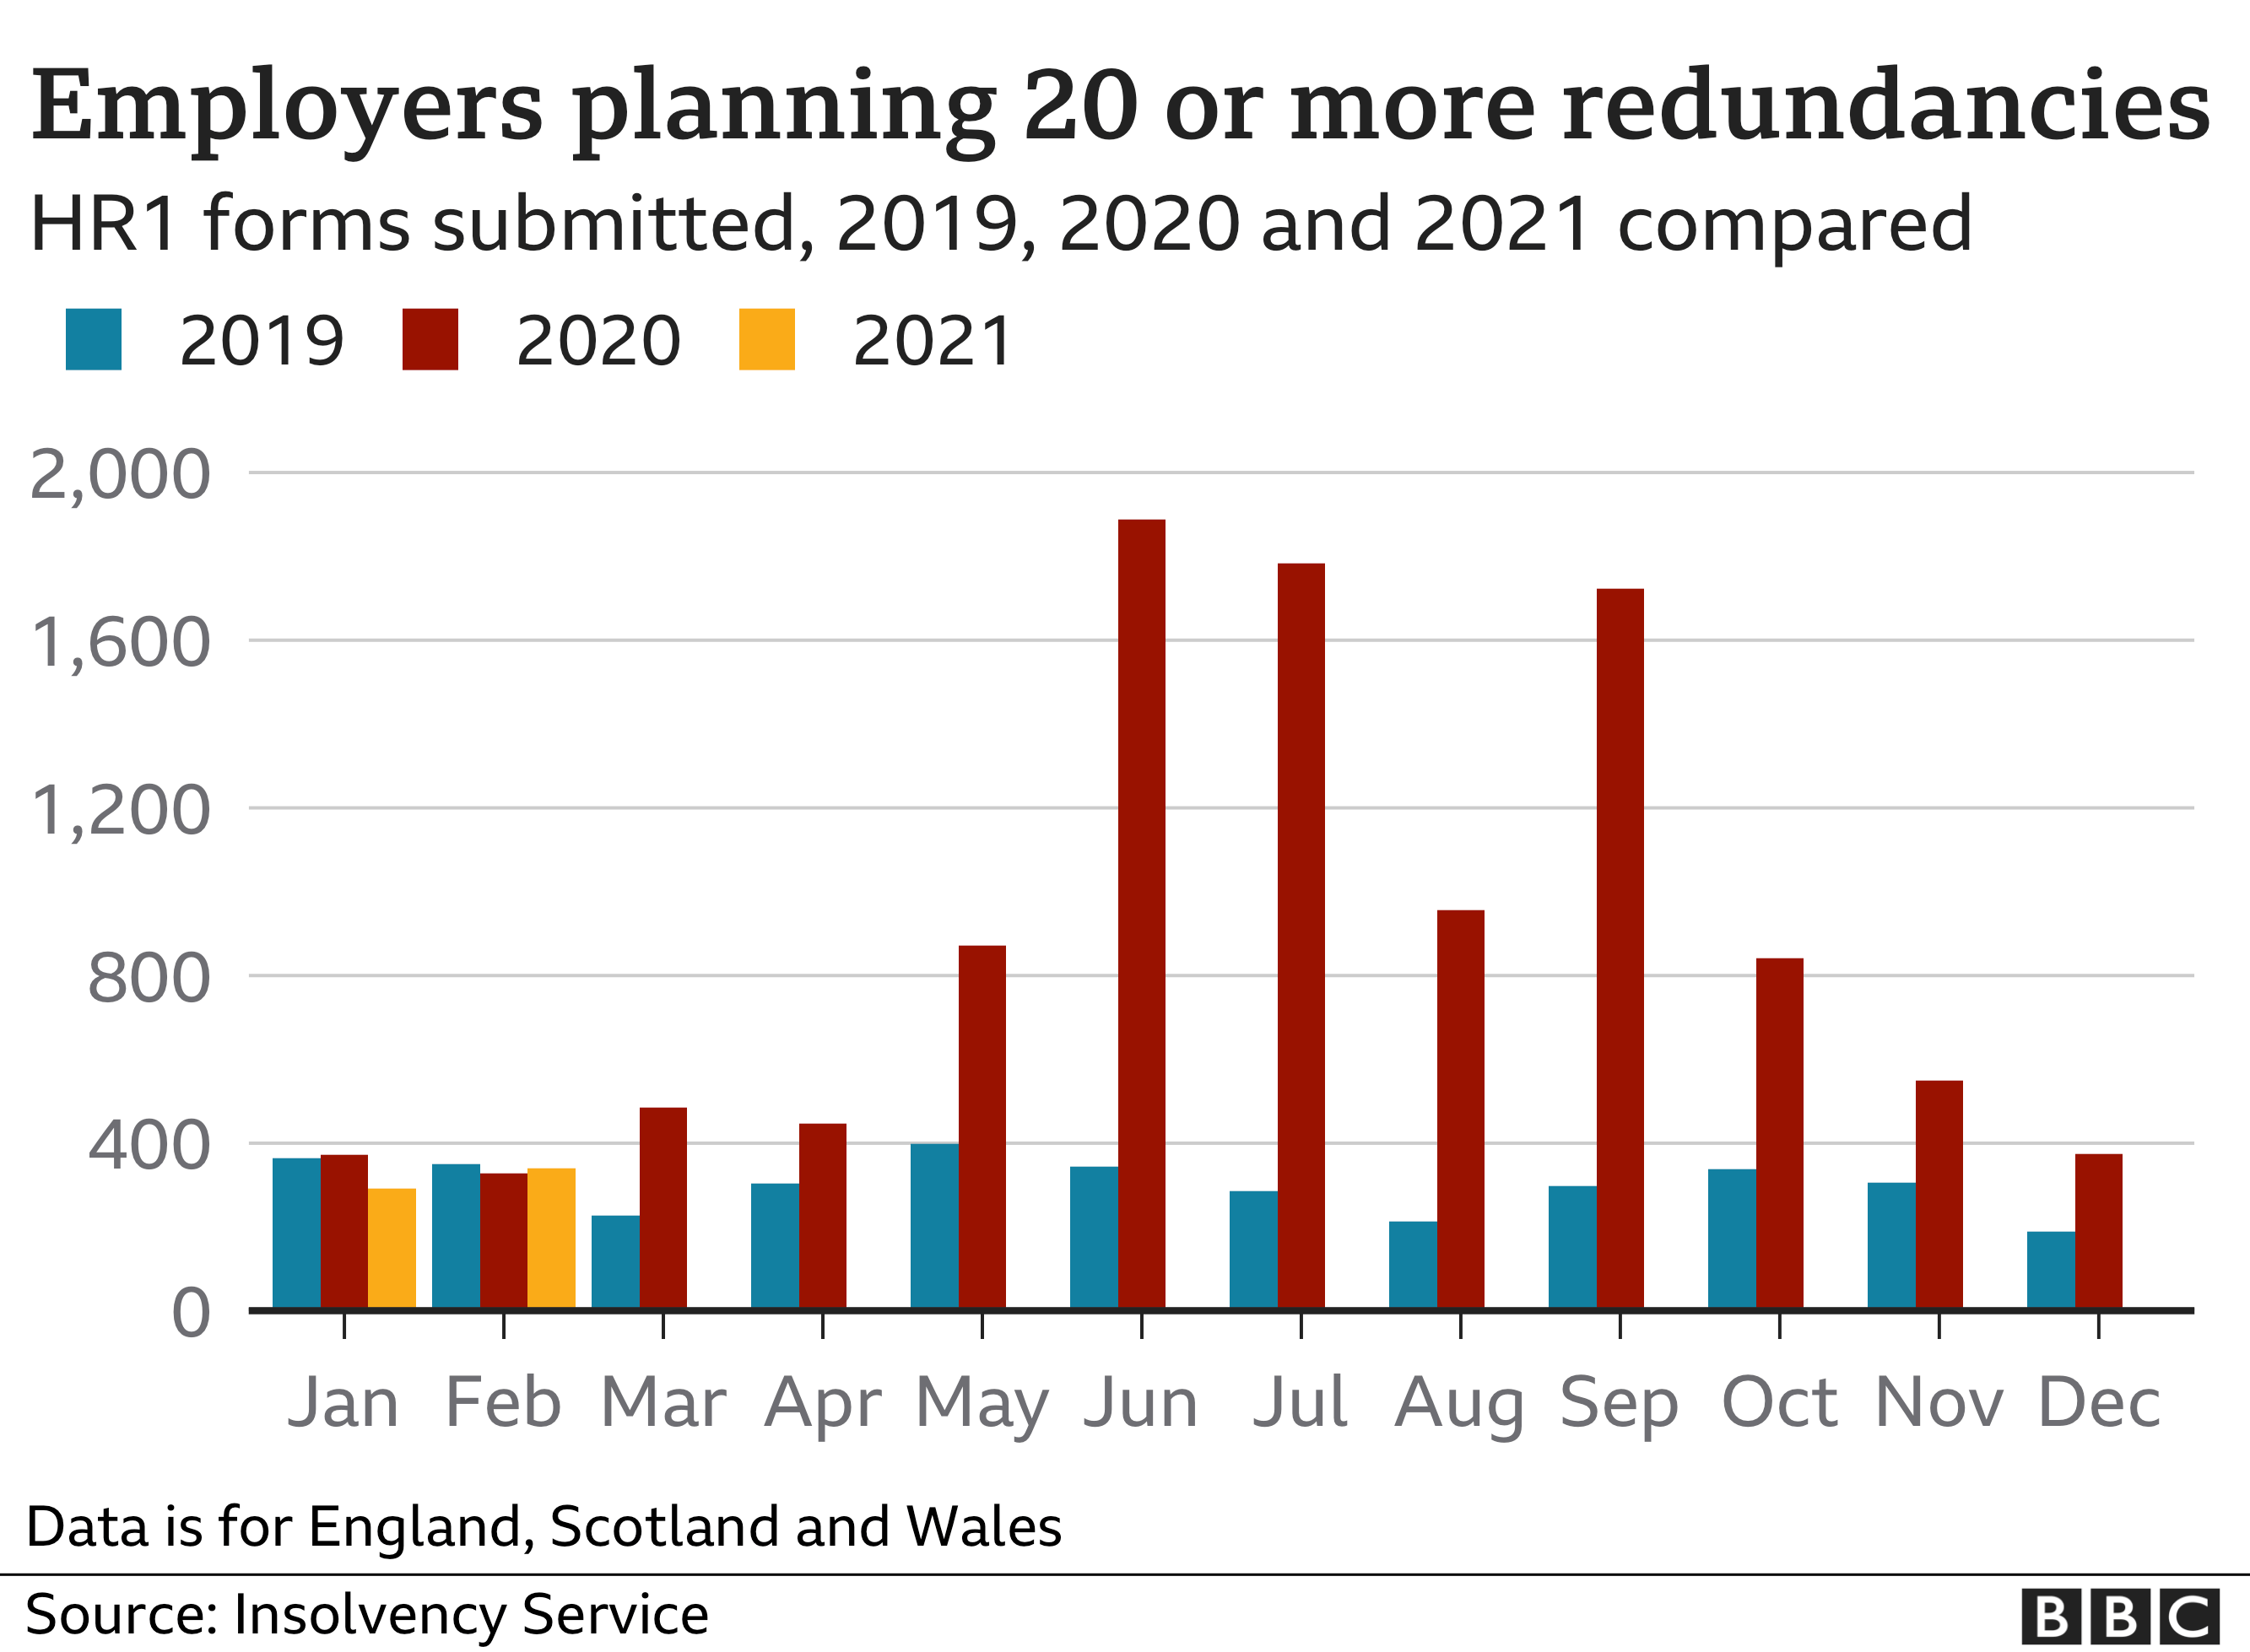 Graph showing the number of planned redundancies in England, Scotland and Wales